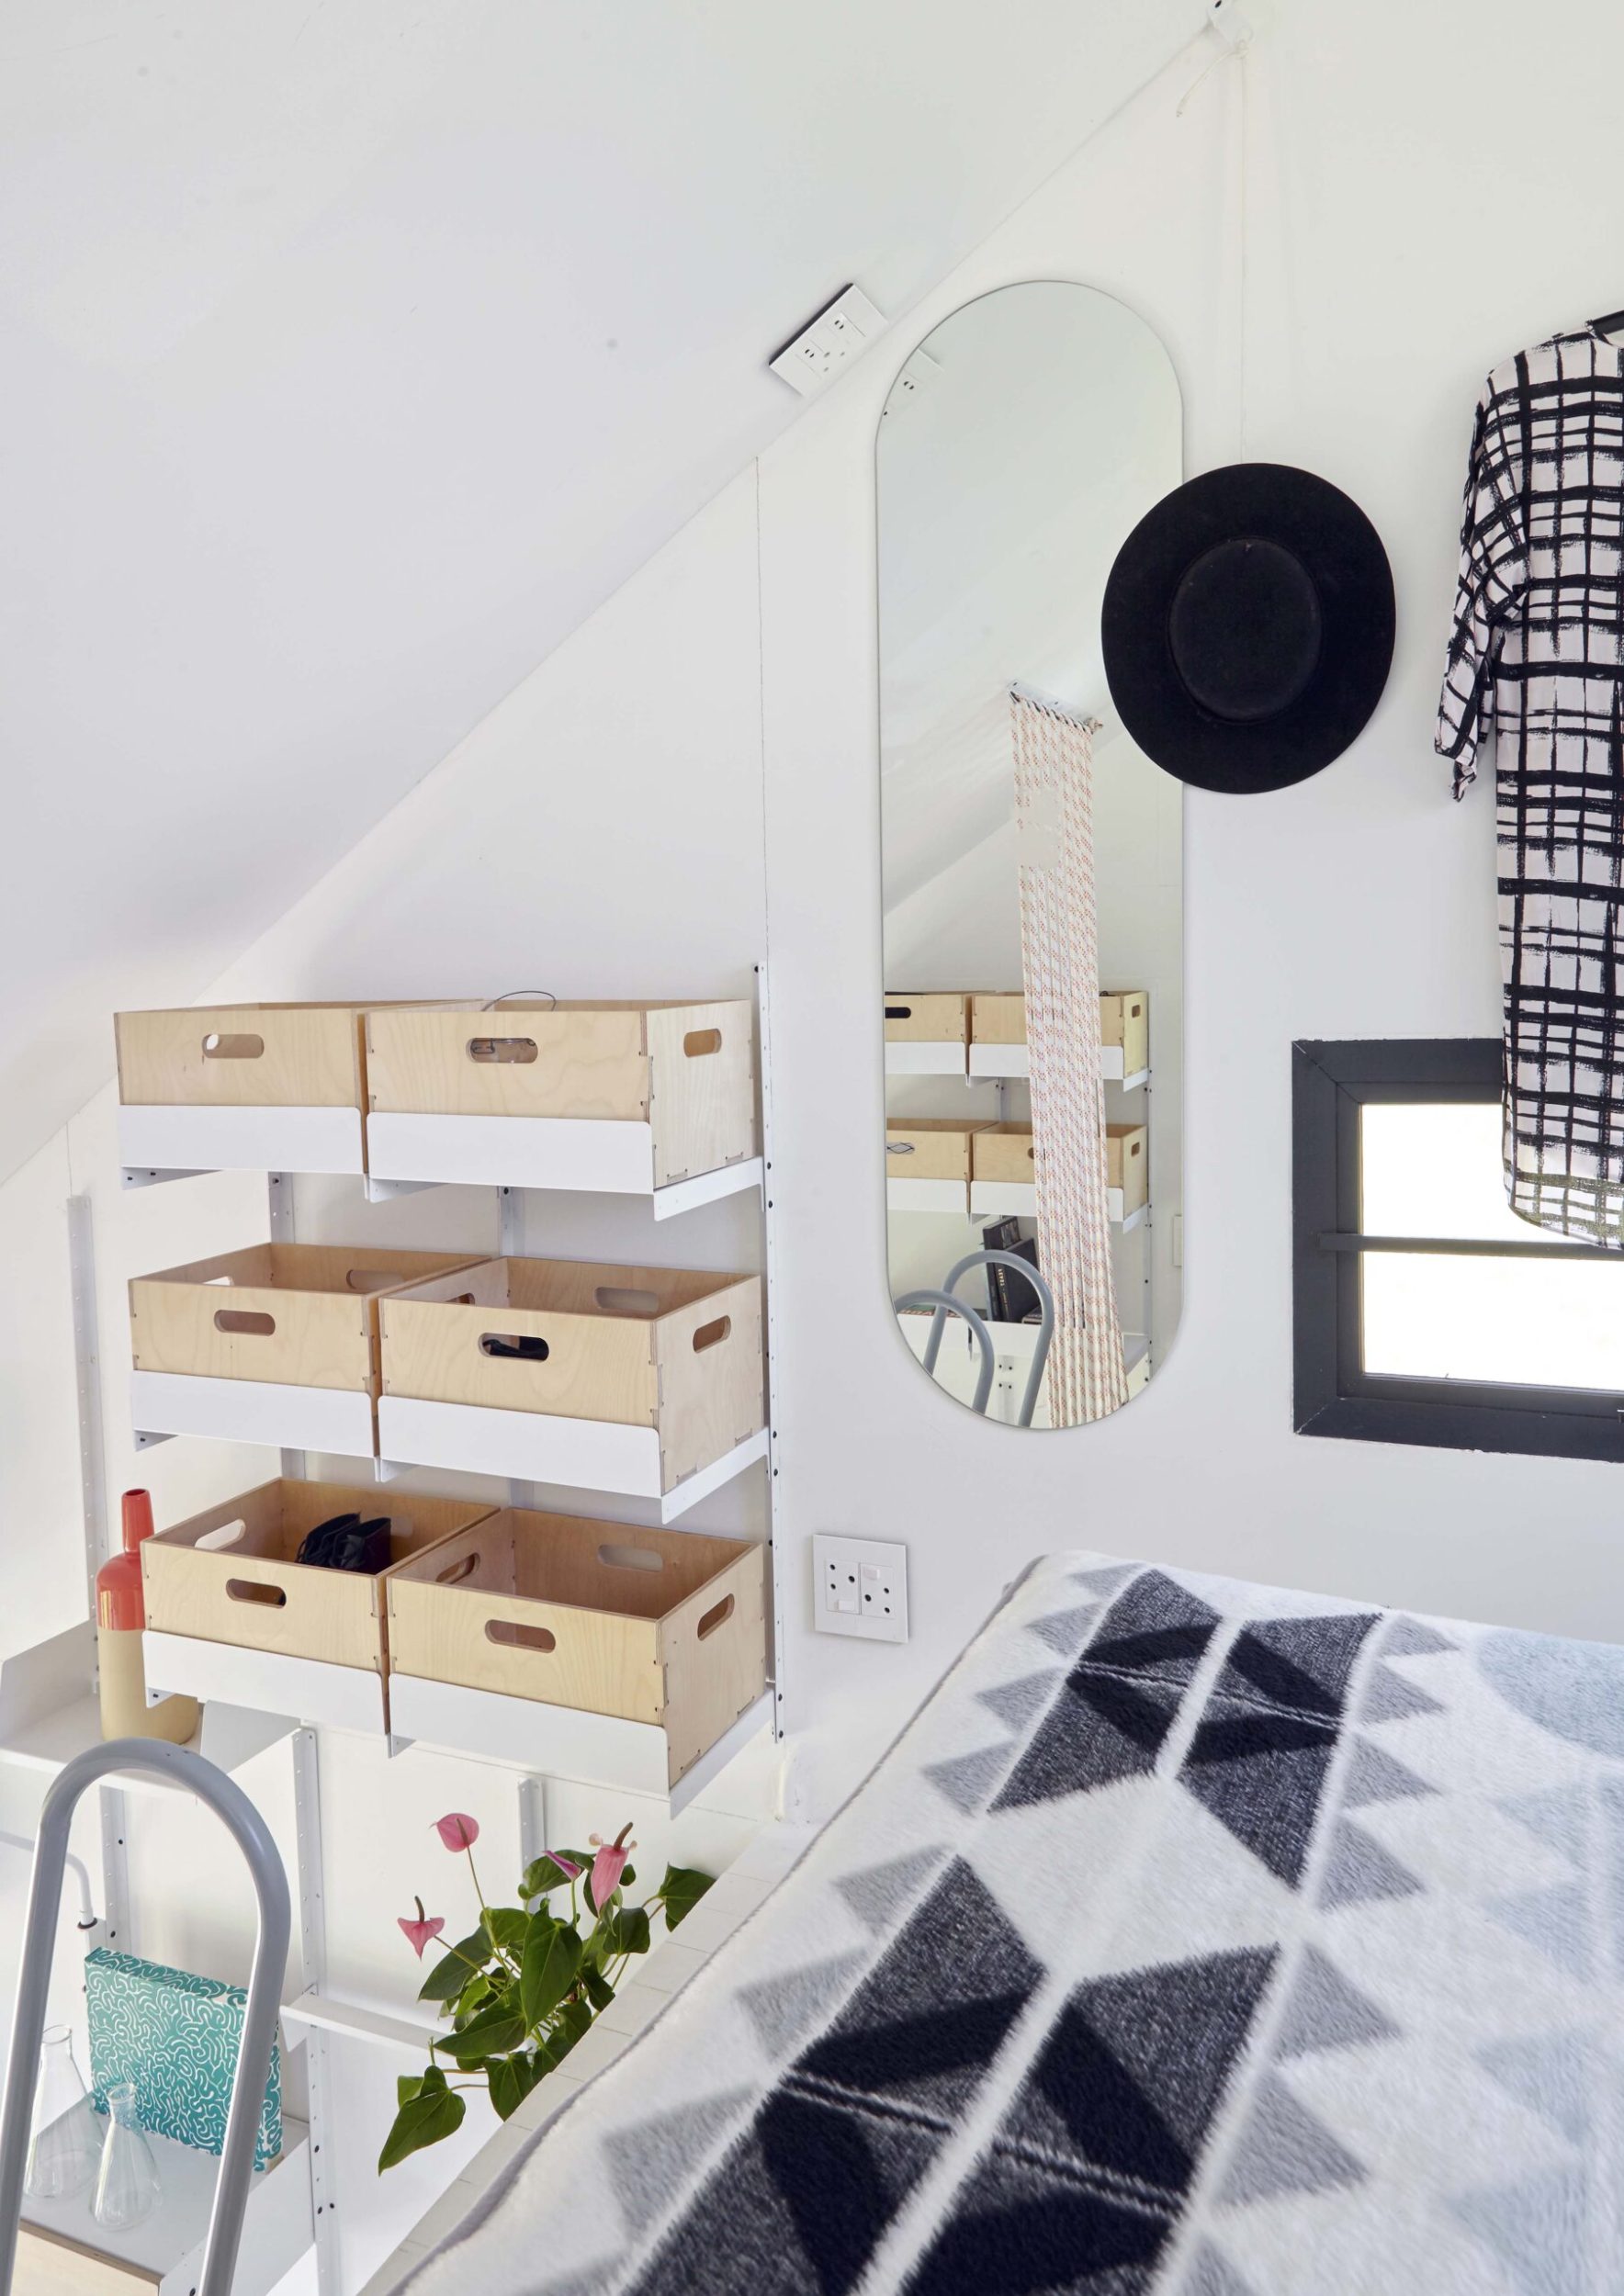 Small bedroom with wooden shelves, oval hanging mirror and patterned black and white bedspread